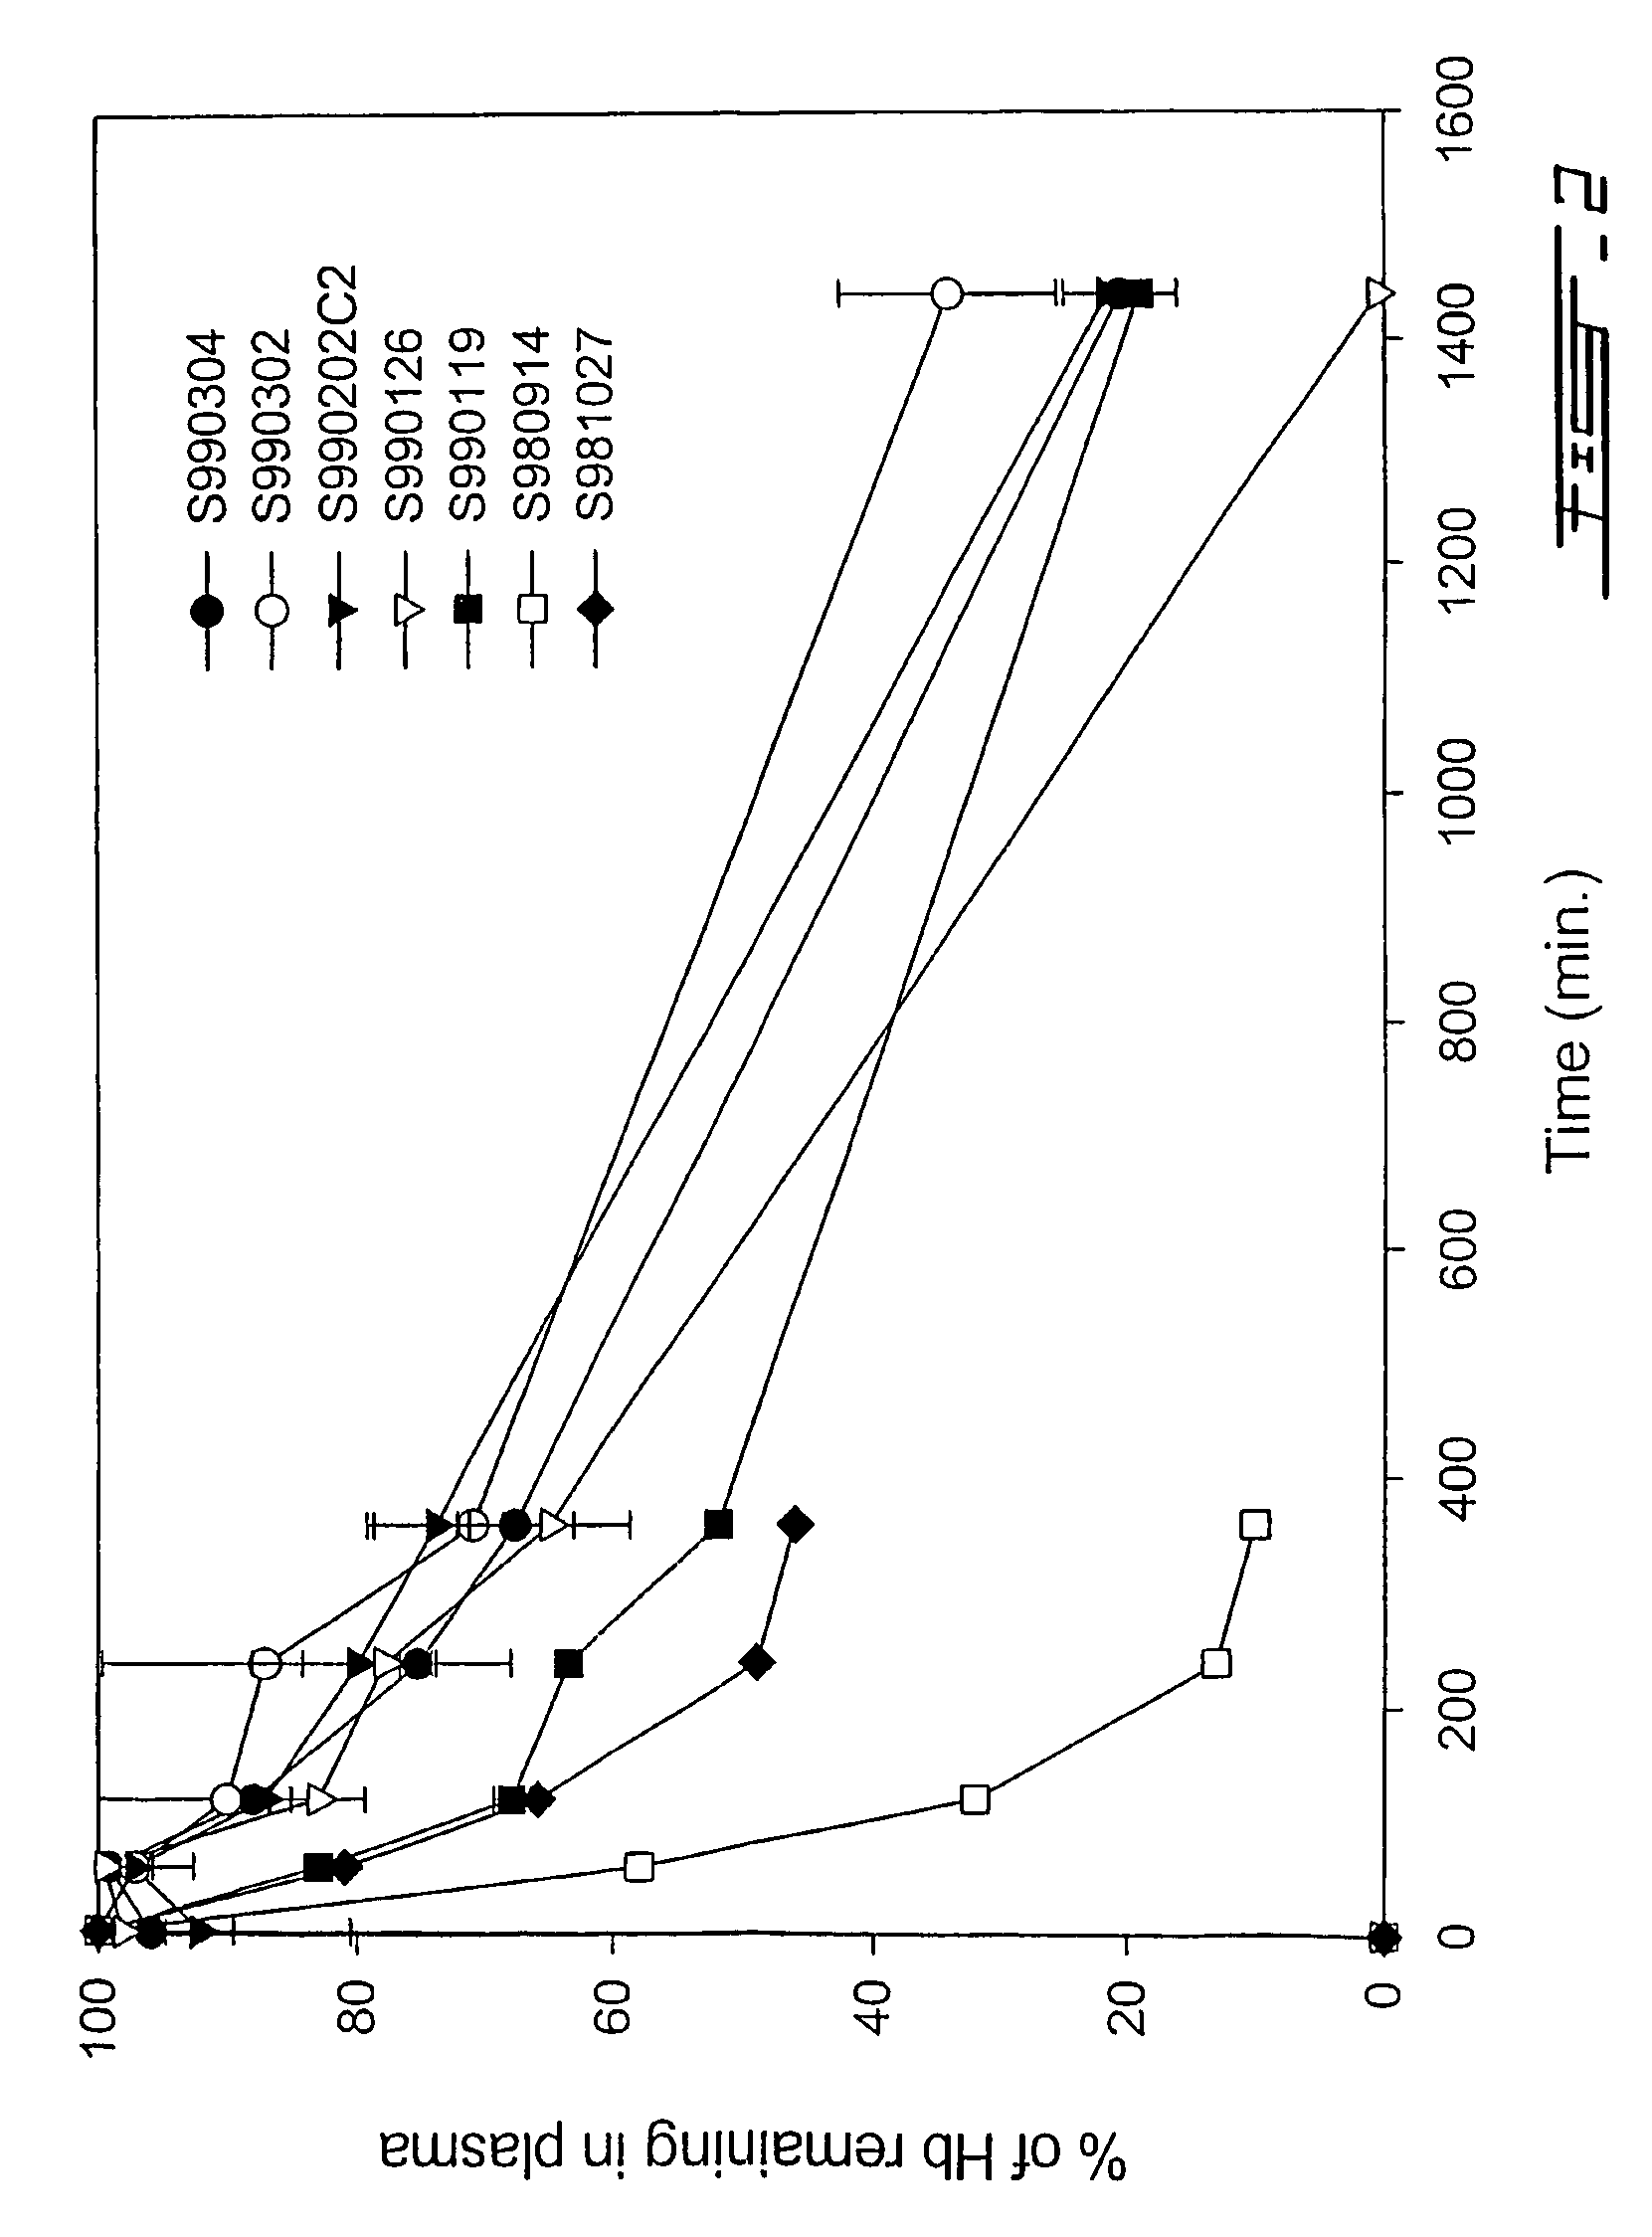 Biodegradable polymeric nanocapsules and uses thereof